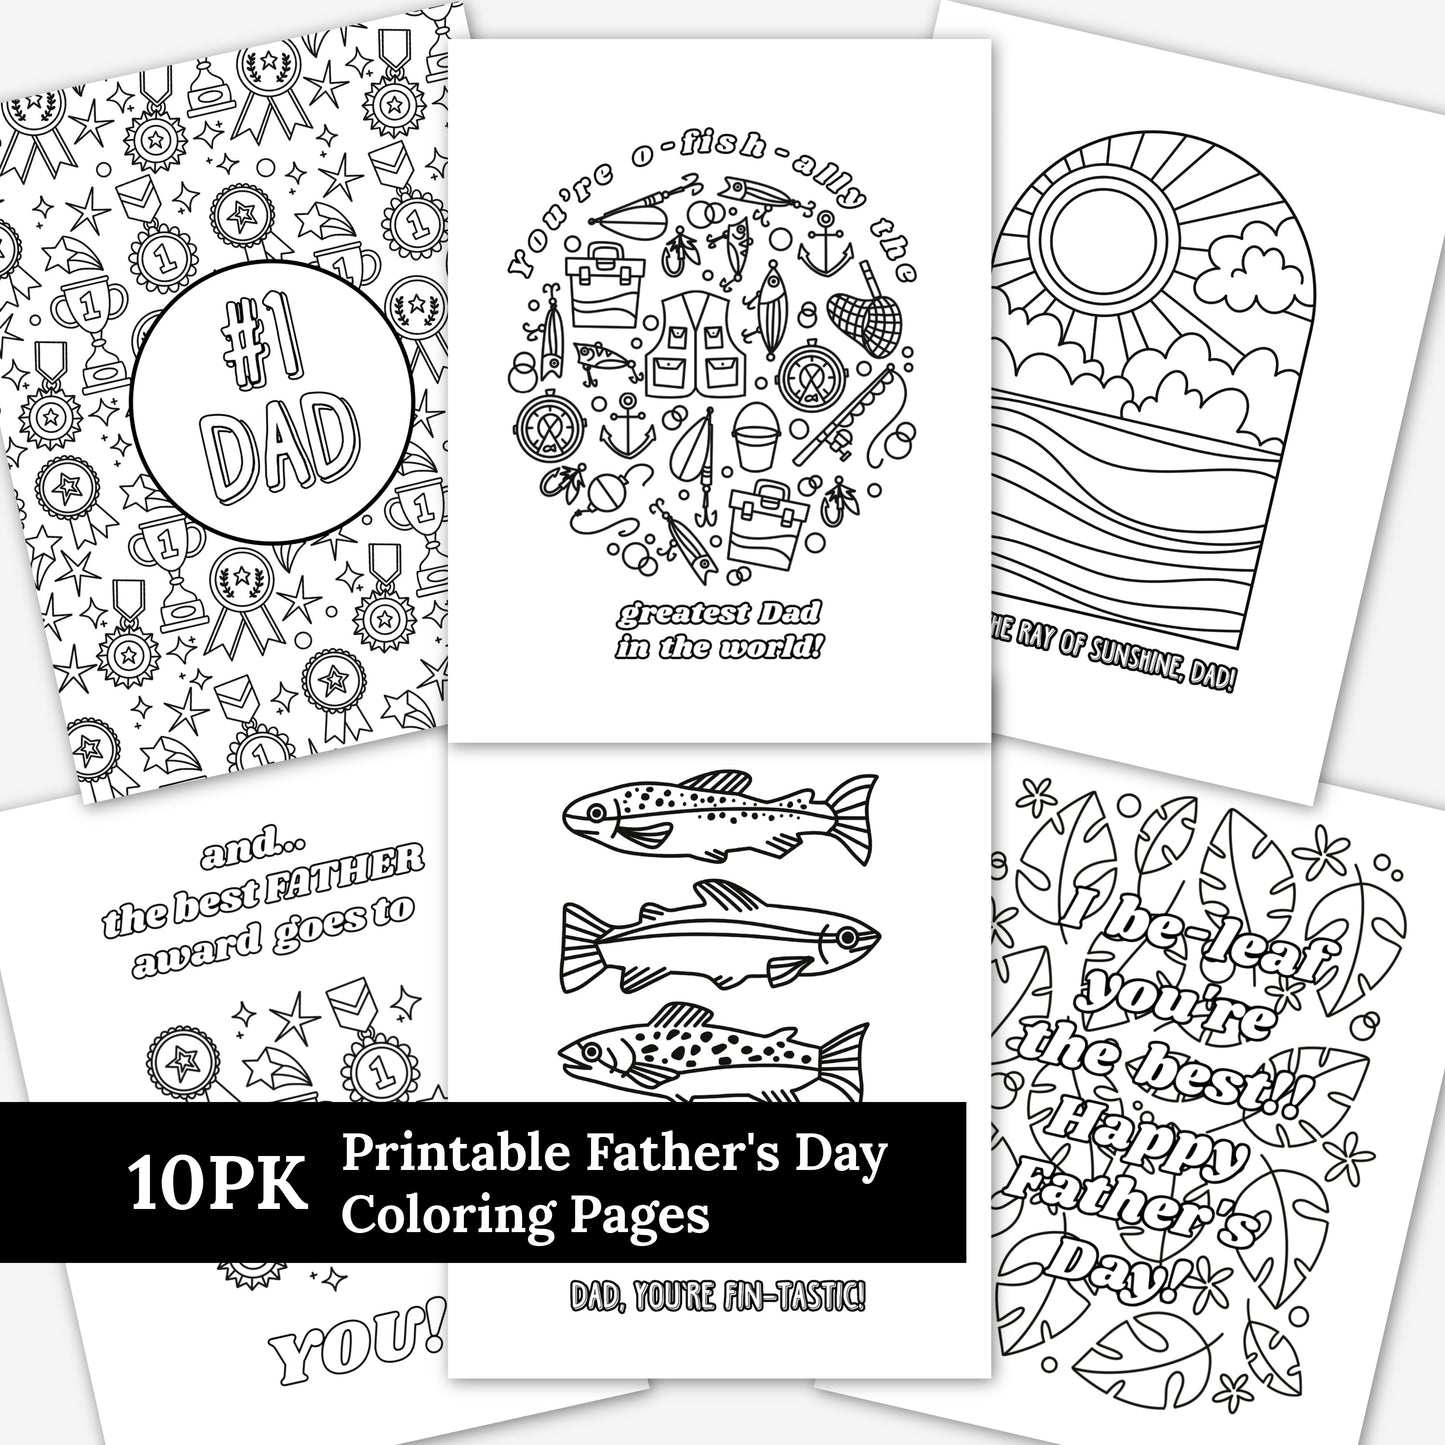 10 Father's Day Printable Coloring Pages | Illustrated Fishing Camping Awards & Medals Coloring Sheets